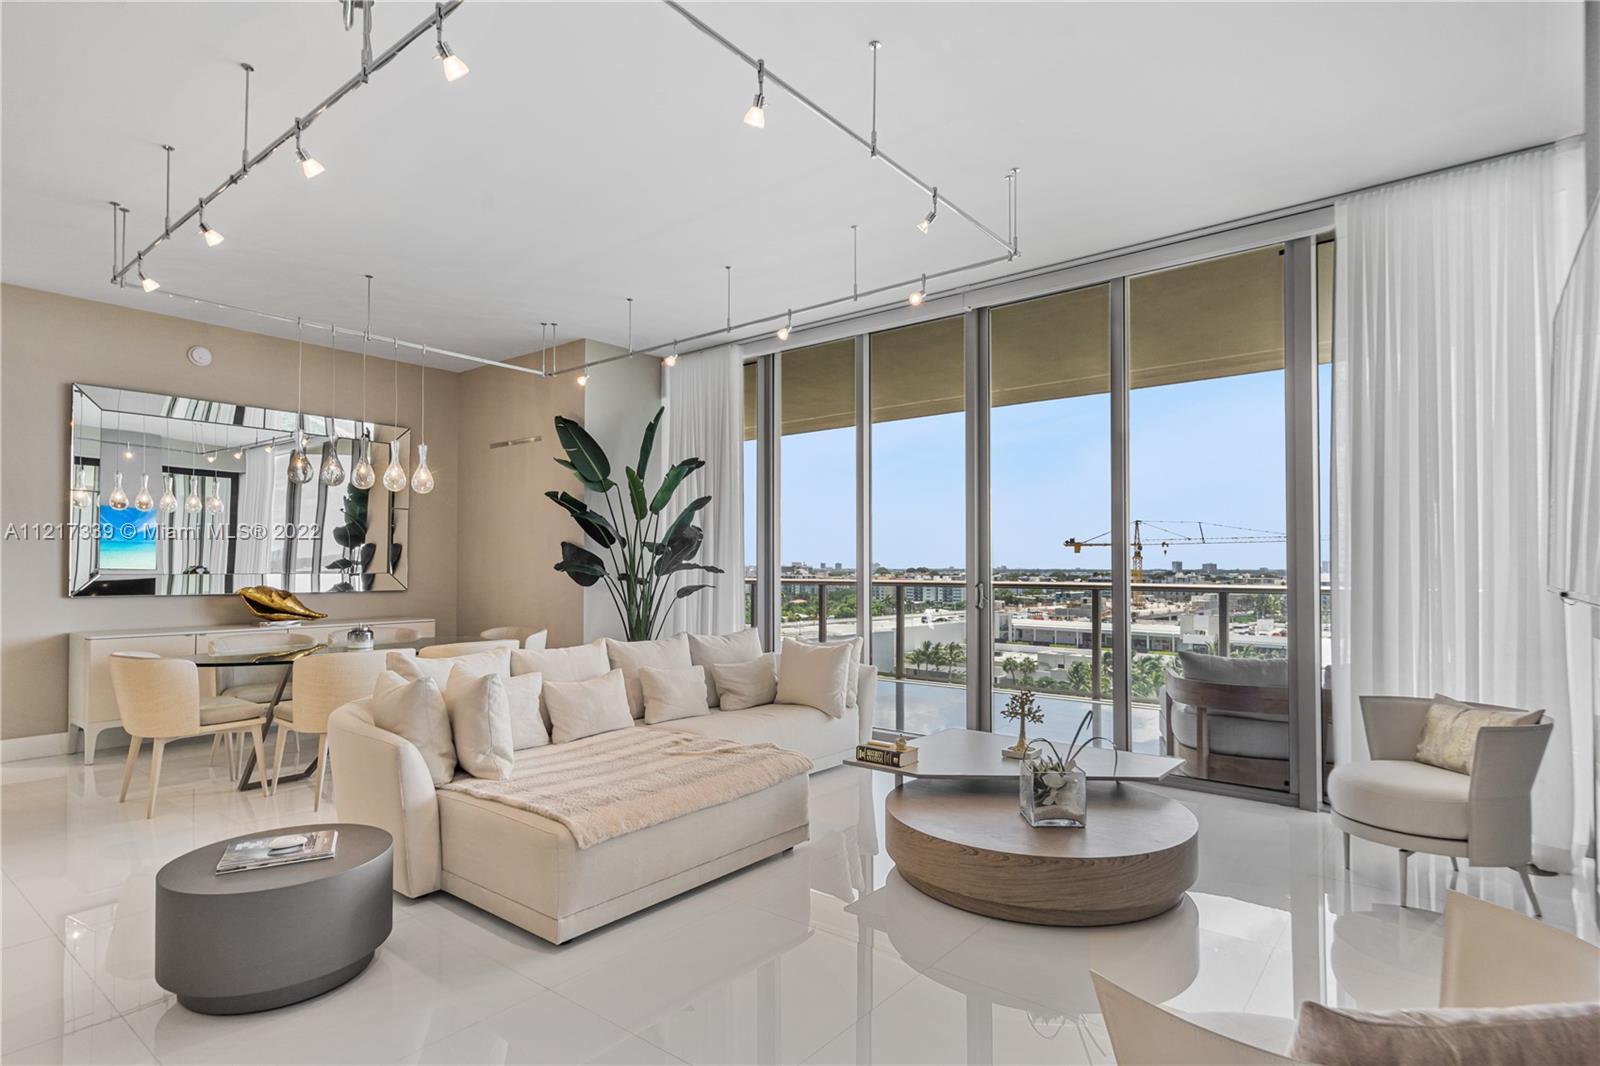 "PRICE REDUCED" Remodeled 2 bedroom - 2.5 bathroom unit at St Regis Residences in Bal Harbour.
This